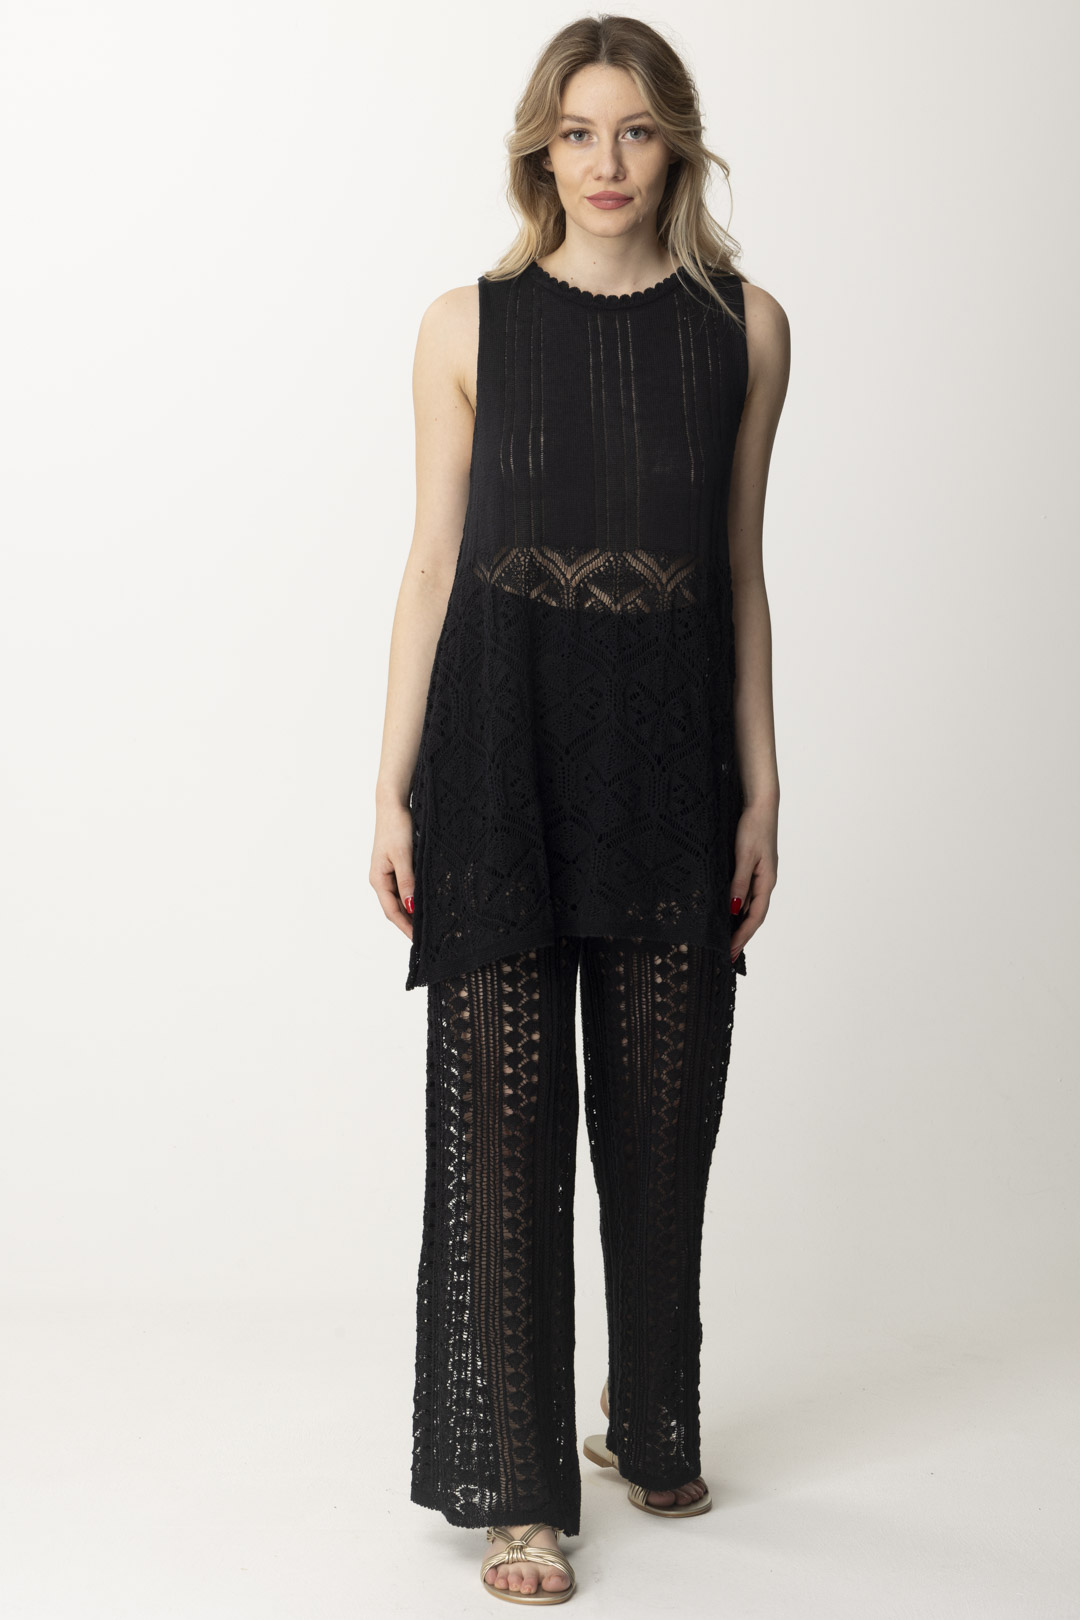 Preview: AKEP Linen Knit Perforated Palazzo Pants Nero